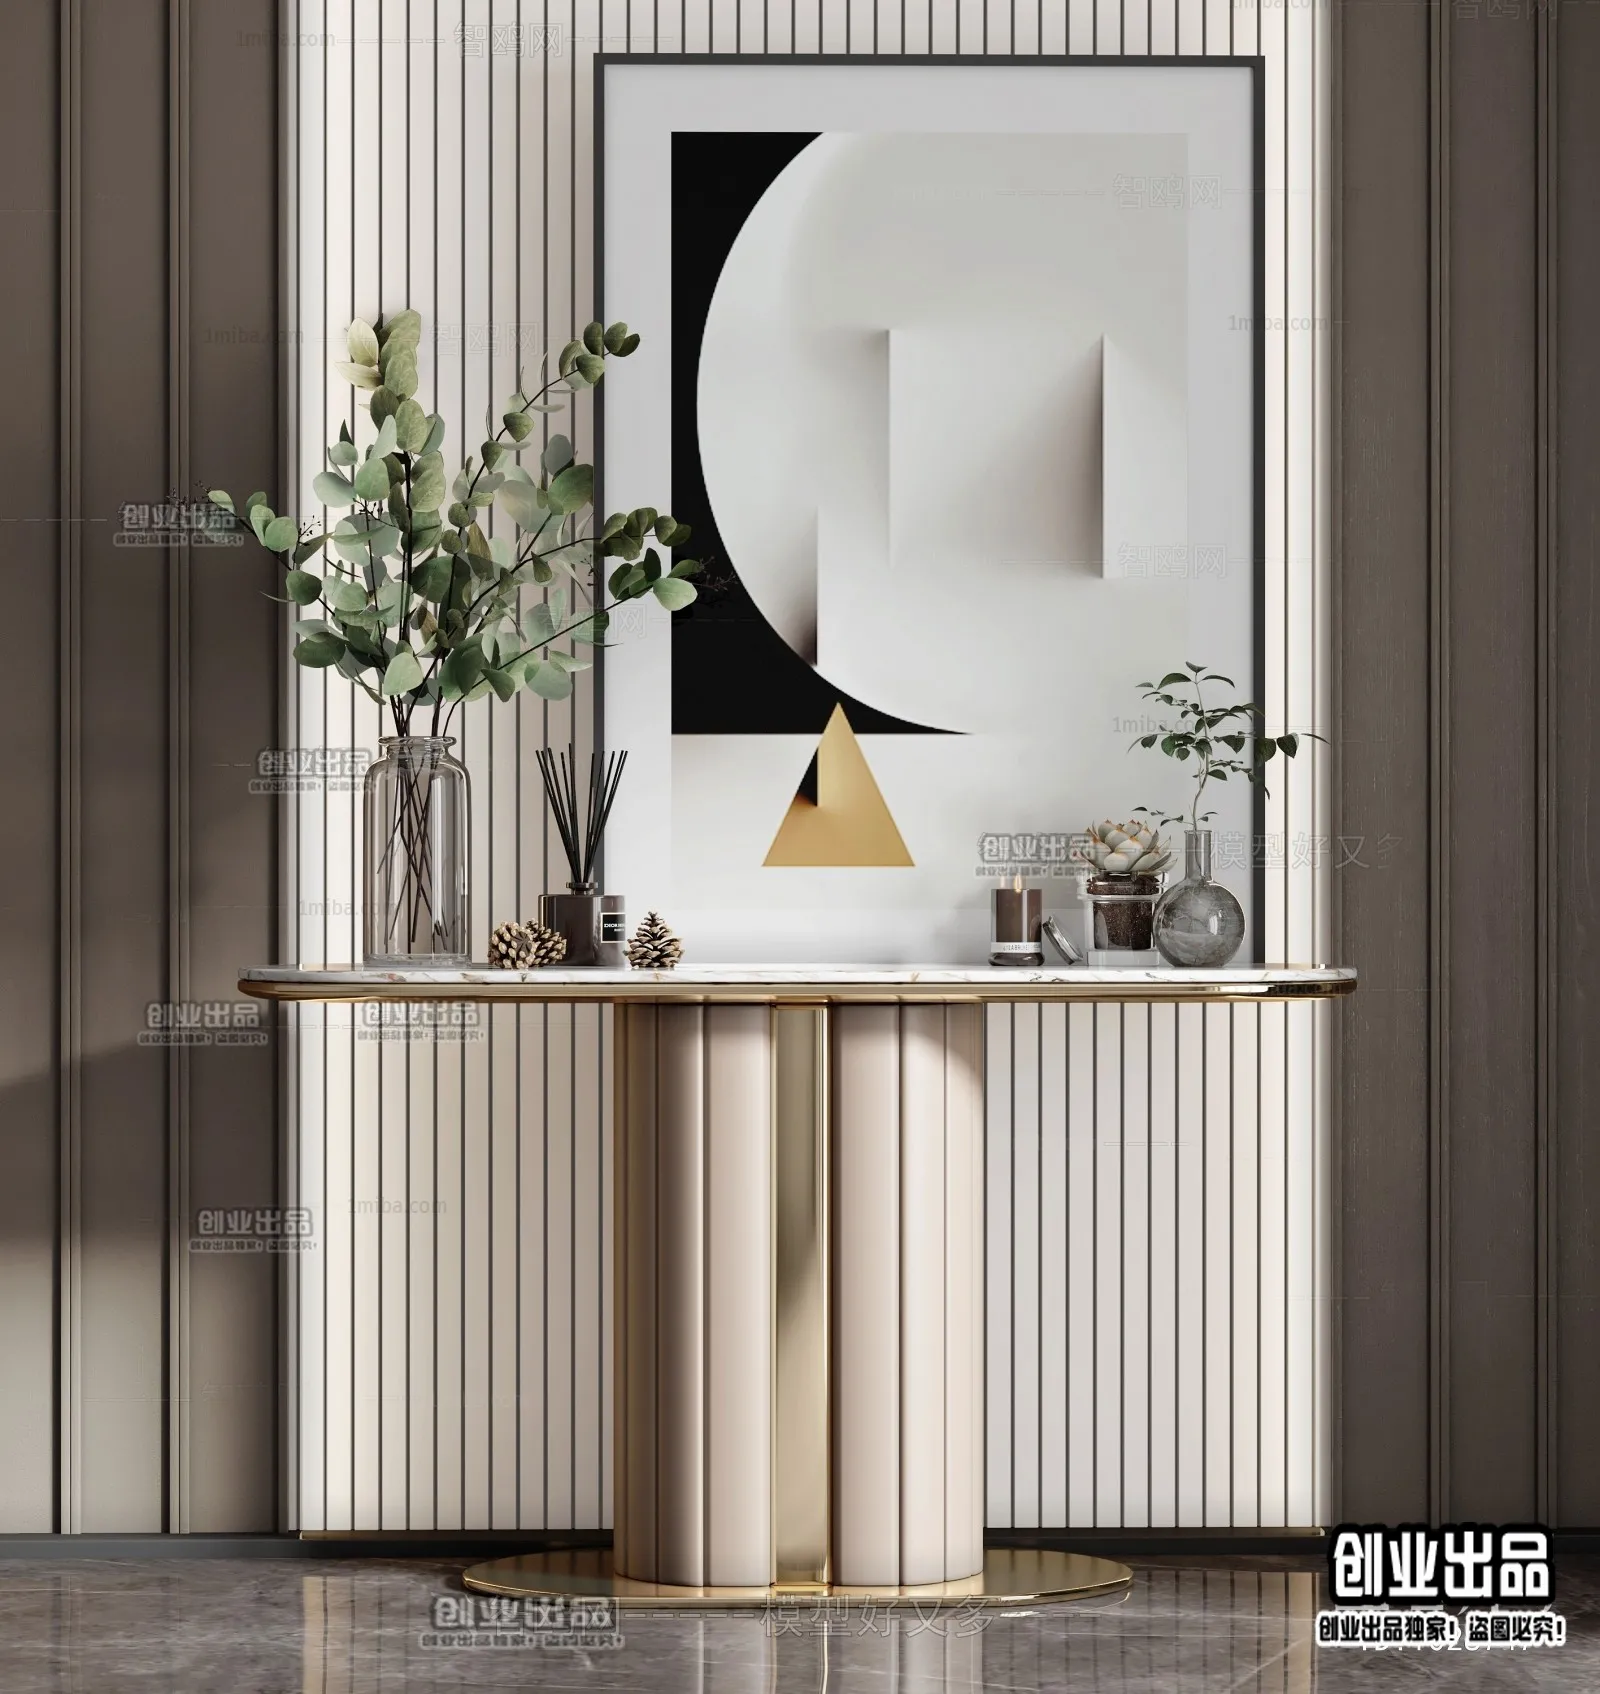 CONSOLE TABLE – 3 – FURNITURE 3D MODELS 2022 (VRAY)